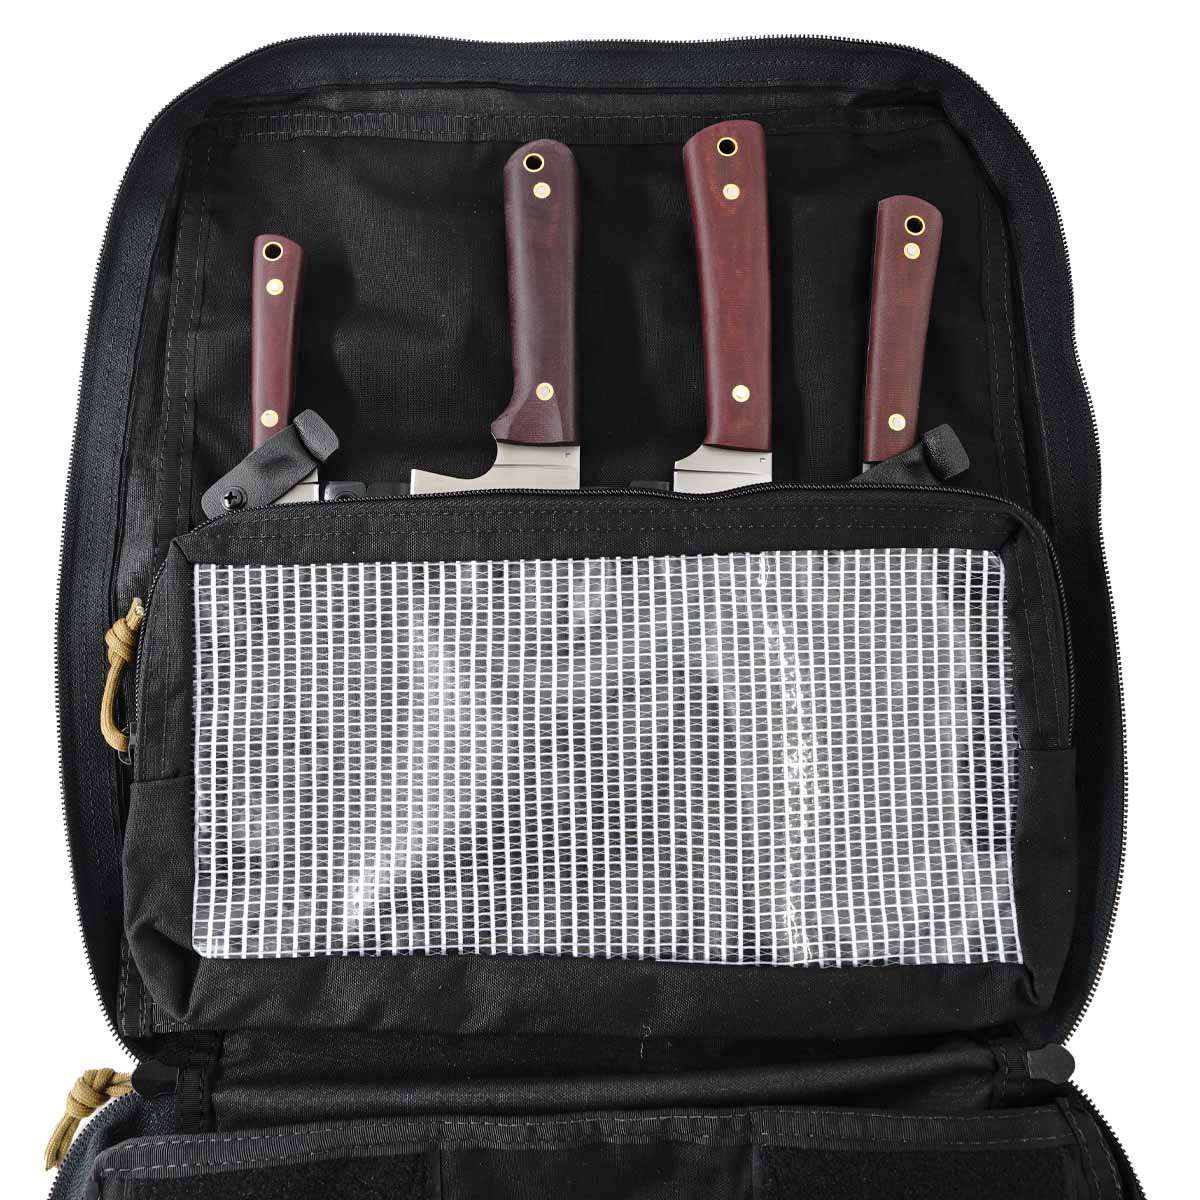 LT Wright Cookcraft Collection 4 Piece Knife Set - Red